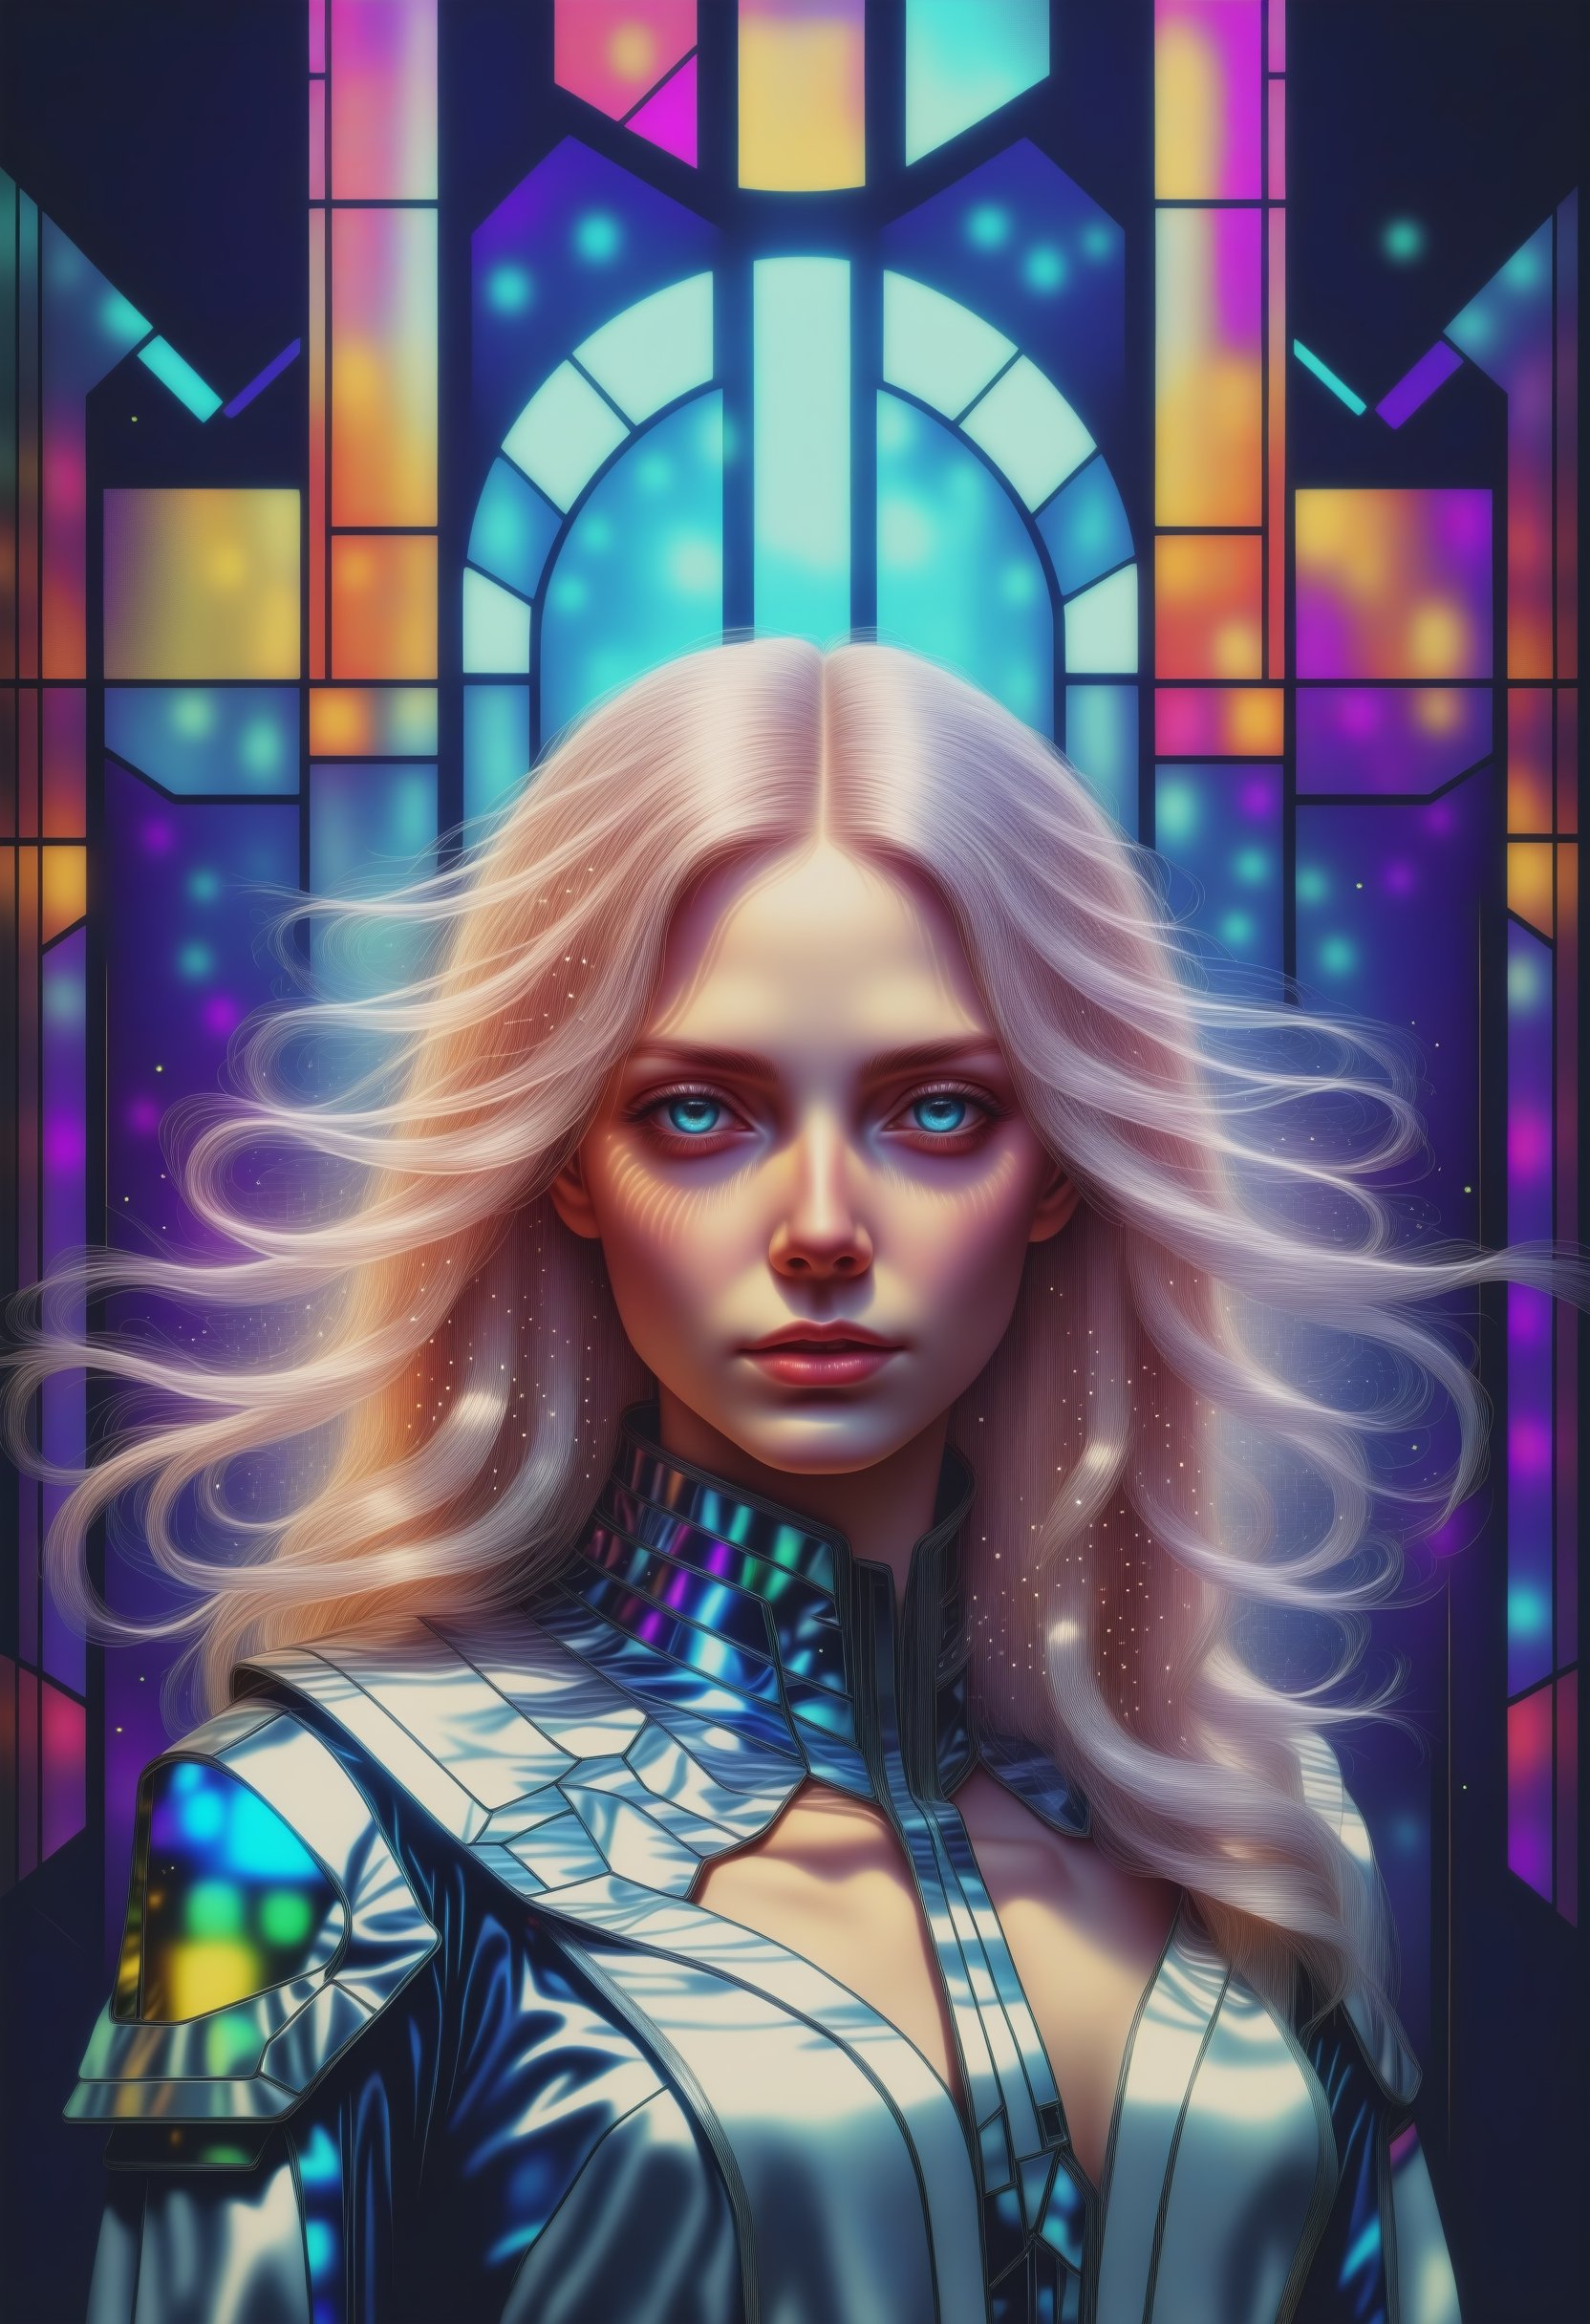 medium shot, DonMM1y4XL midage woman, alternate dimensions, stained glass window, conceptual art, sci-fi, chaotic, gpu particle systems, unity engine, cyberpunk, gum bichromate printing, vector art,   artistic triumph, ultra-high resolution, newfangled, syntax # f/11, shutter speed 1/60 sec, iso800, white balance shade, exposure compensation    "-0.5 ev", shutter priority shooting mode, leading lines, focus mode manual, partial metering"  
,DonMM1y4XL,<lora:659095807385103906:1.0>,<lora:659095807385103906:1.0>